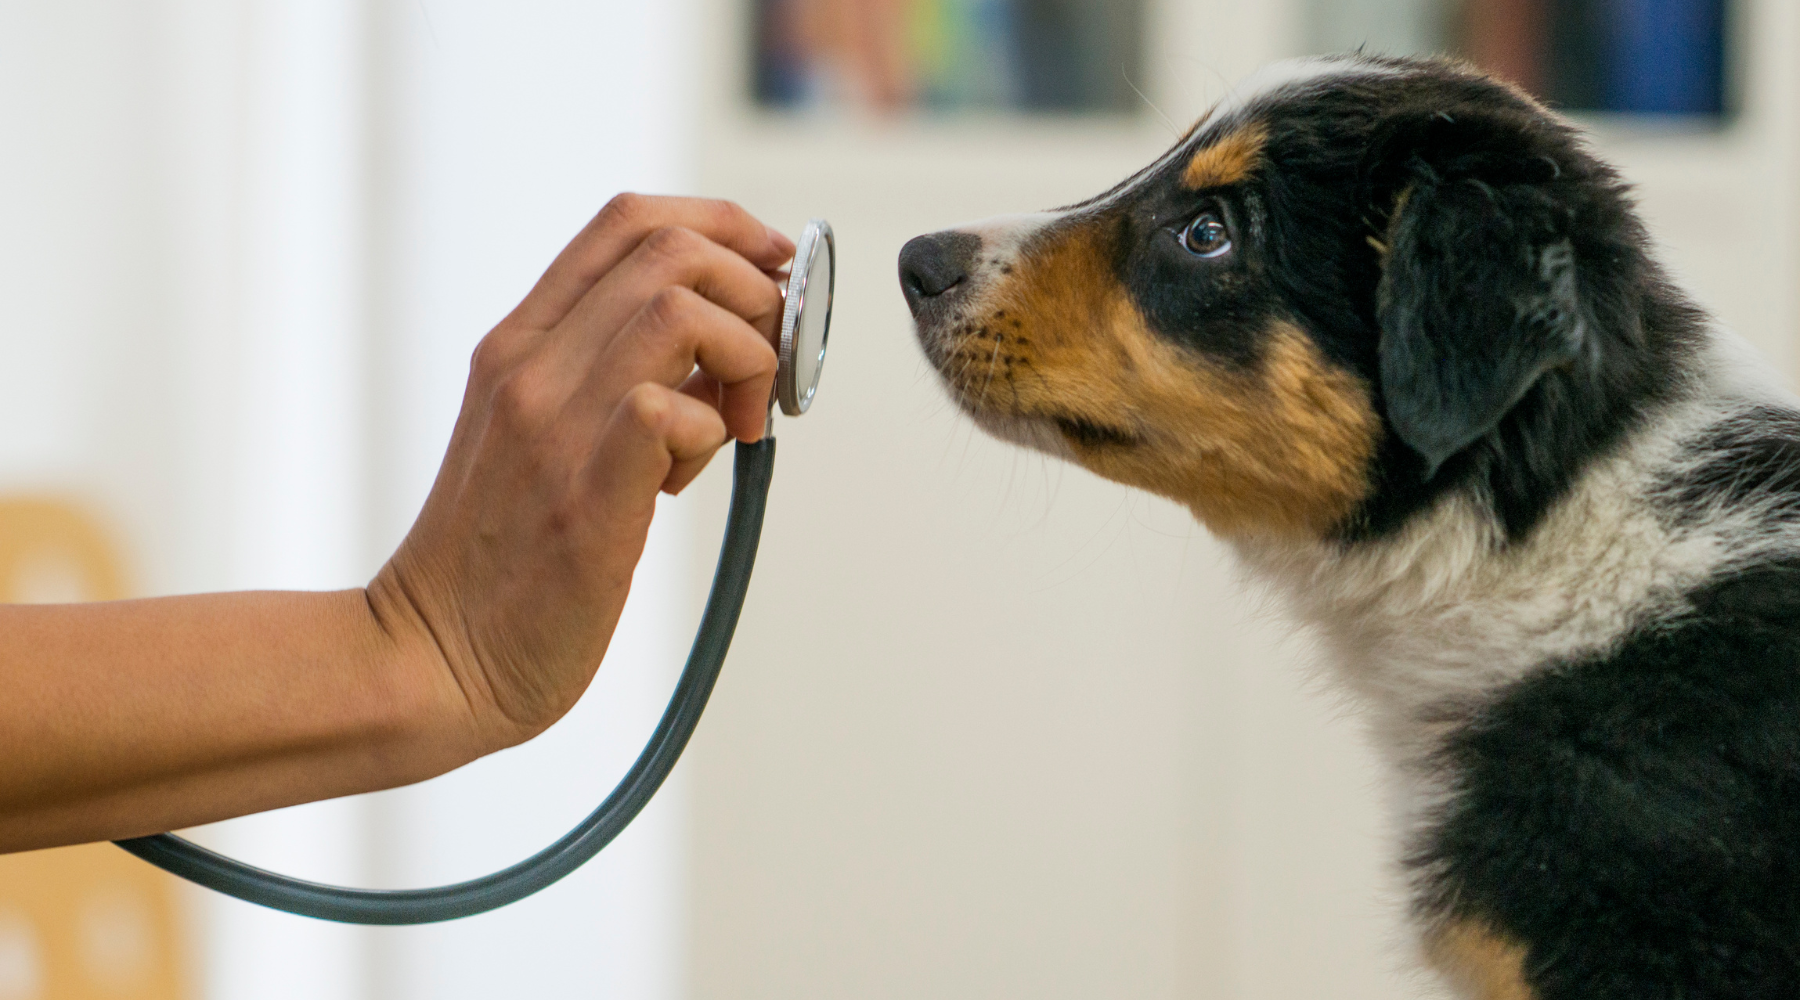 Does My Pet Really Need All This Stuff The Vet Recommends?